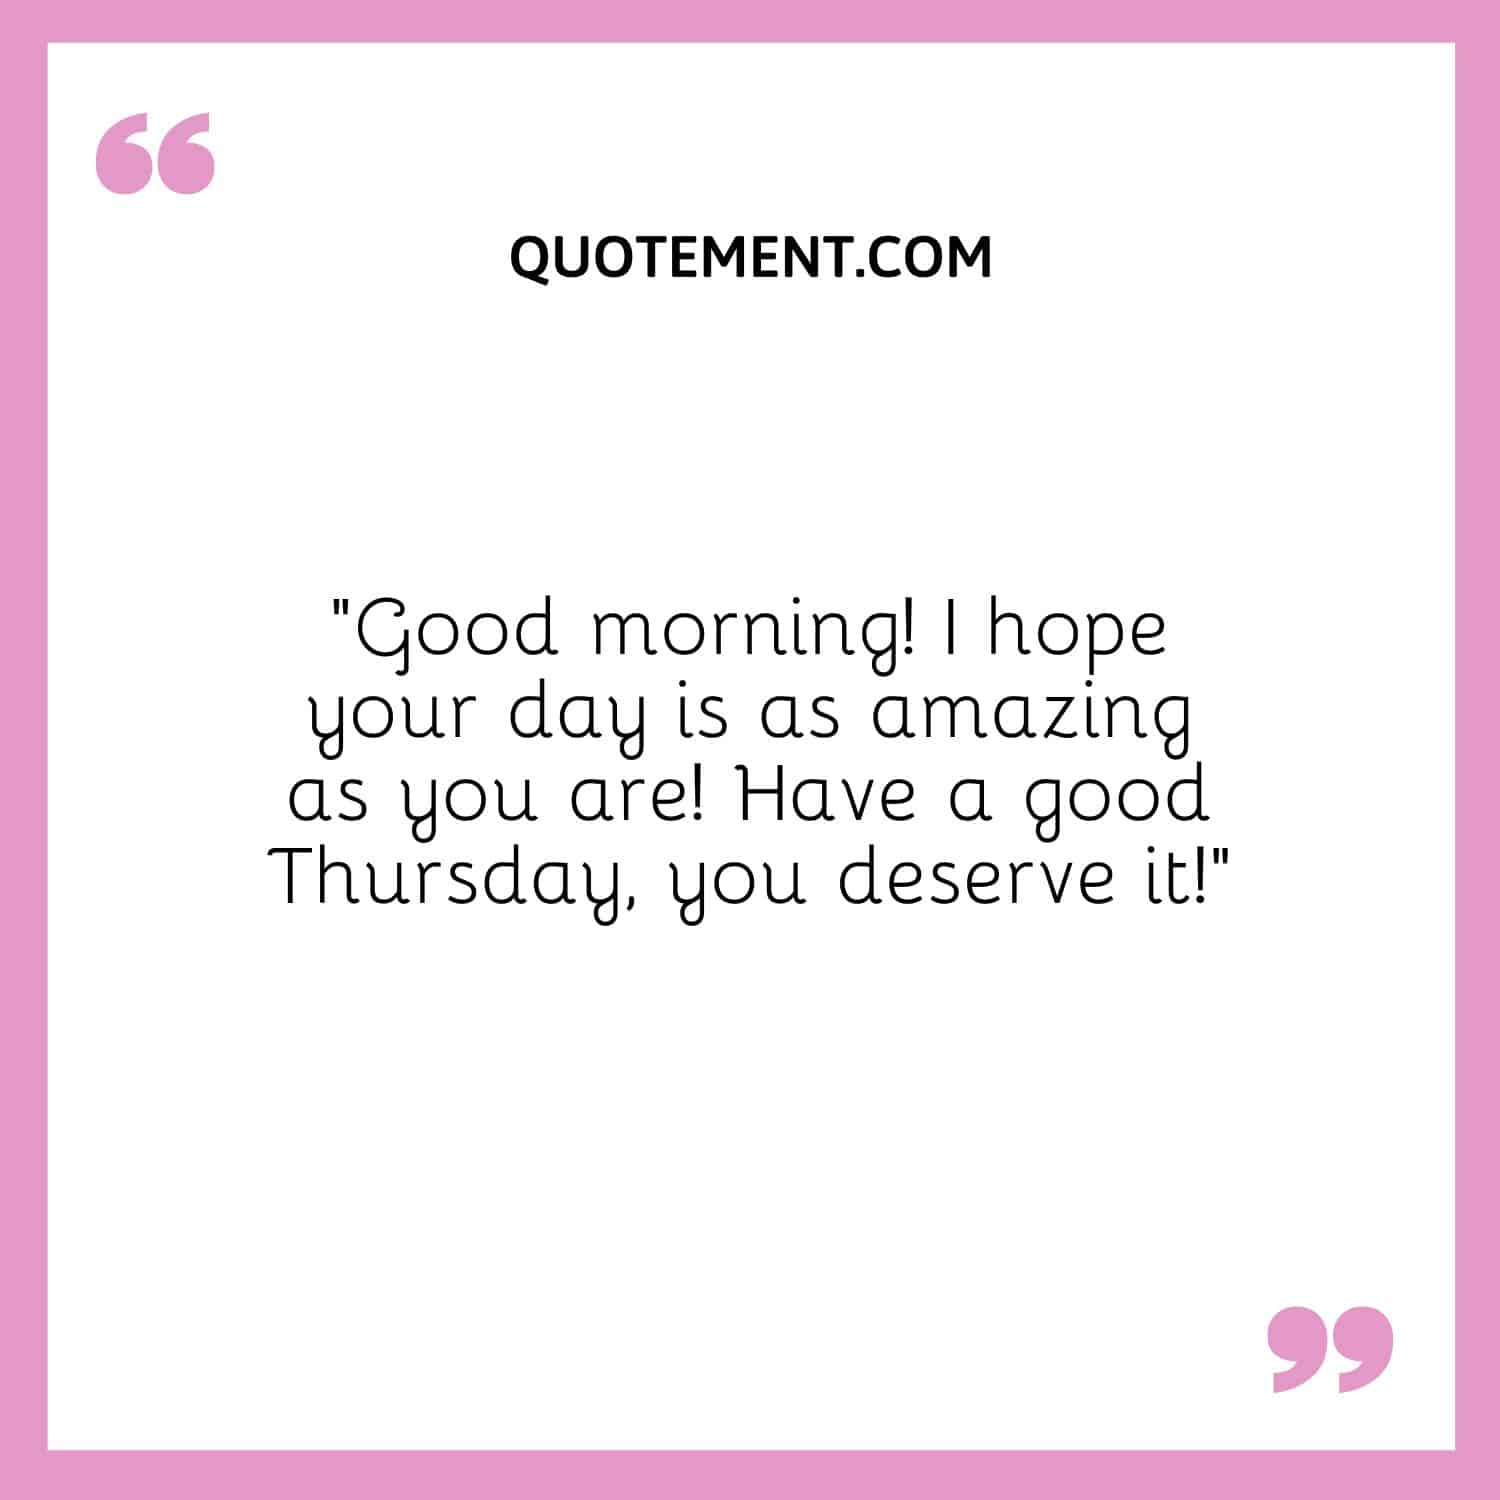 “Good morning! I hope your day is as amazing as you are! Have a good Thursday, you deserve it!”